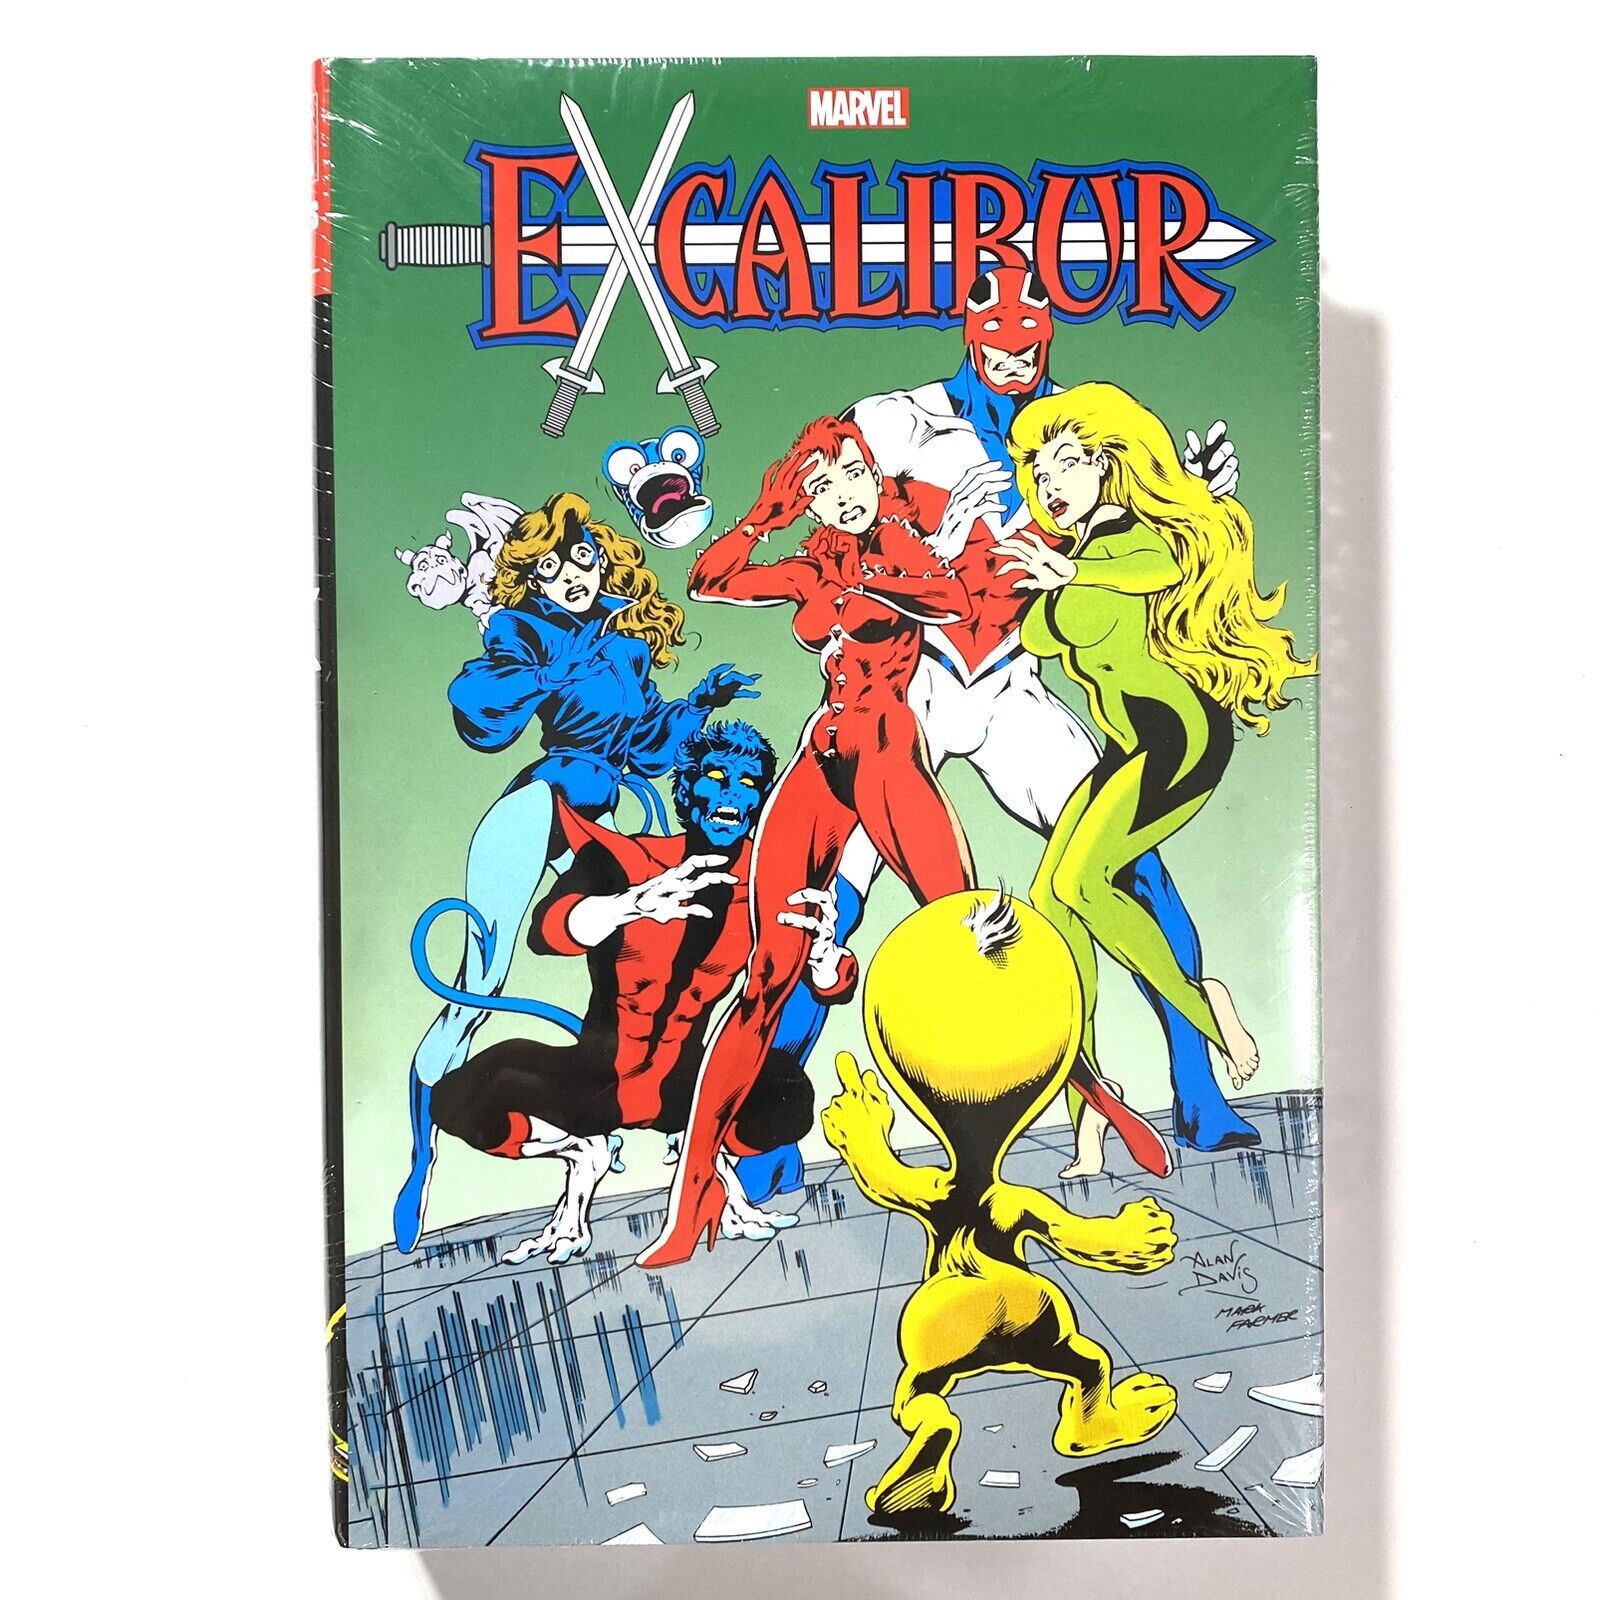 Excalibur Omnibus Vol 2 Marvel New Sealed Hardcover $5 Flat Combined Shipping